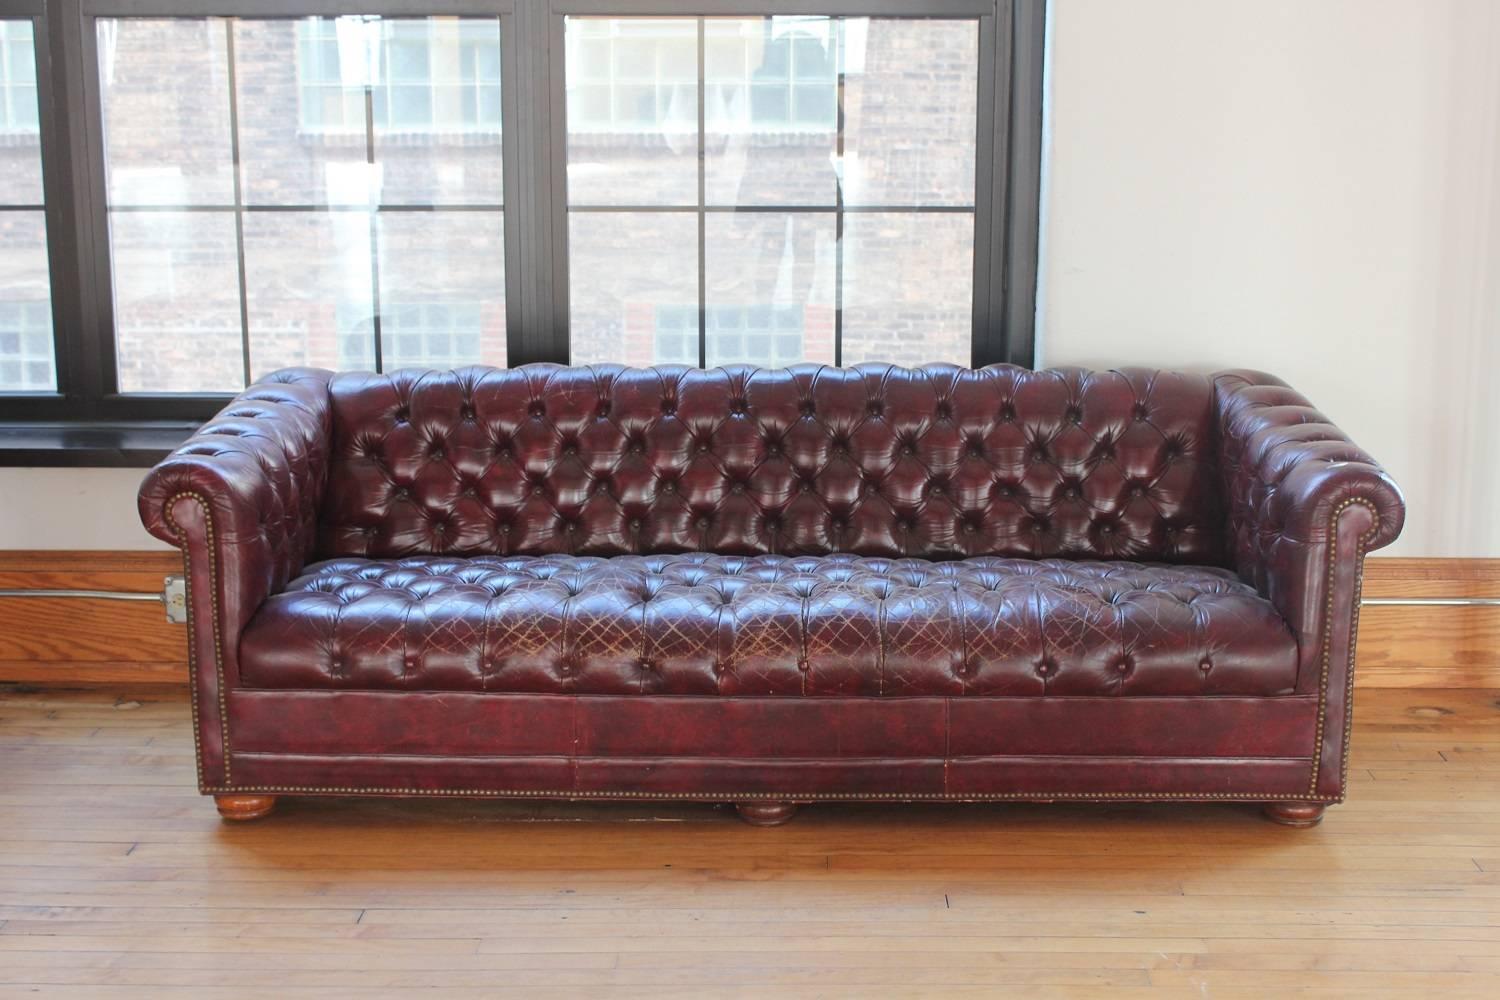 Vintage distressed burgundy leather Chesterfield sofa.